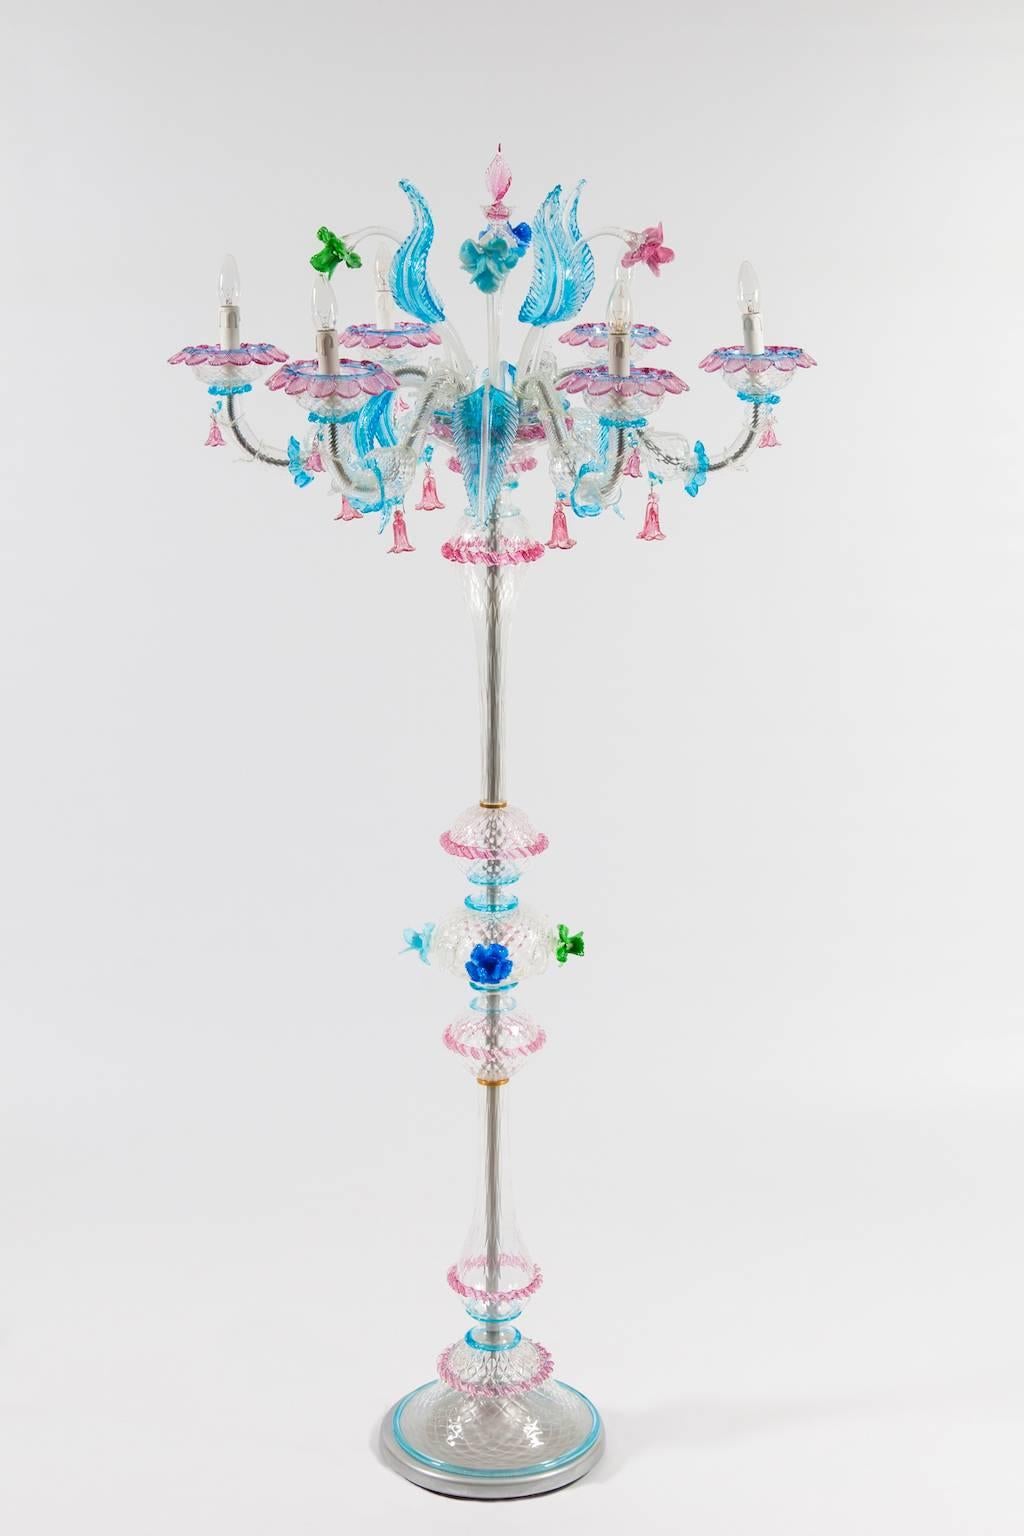 Rezzonico floor lamp with colored flowers in blown Murano glass Italy 1990s.
Italian Ca'Rezzonico floor lamp, in very excellent original conditions, dated 1990s. This beauty is made up of a main stem with in the middle a sphere to create a double